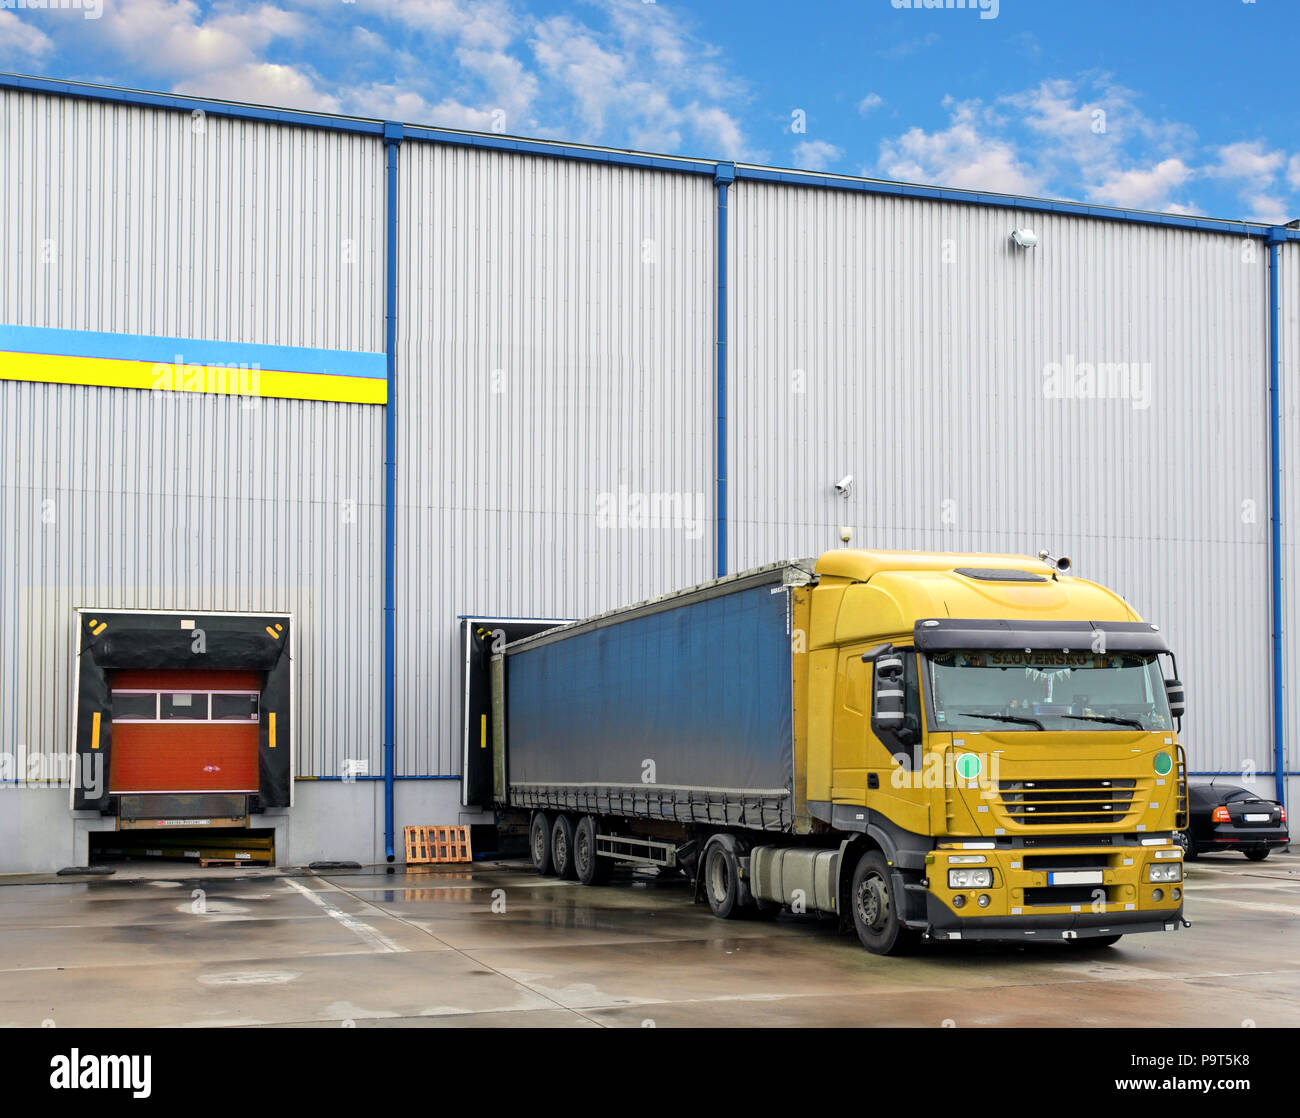 Cargo truck at warehouse building Stock Photo